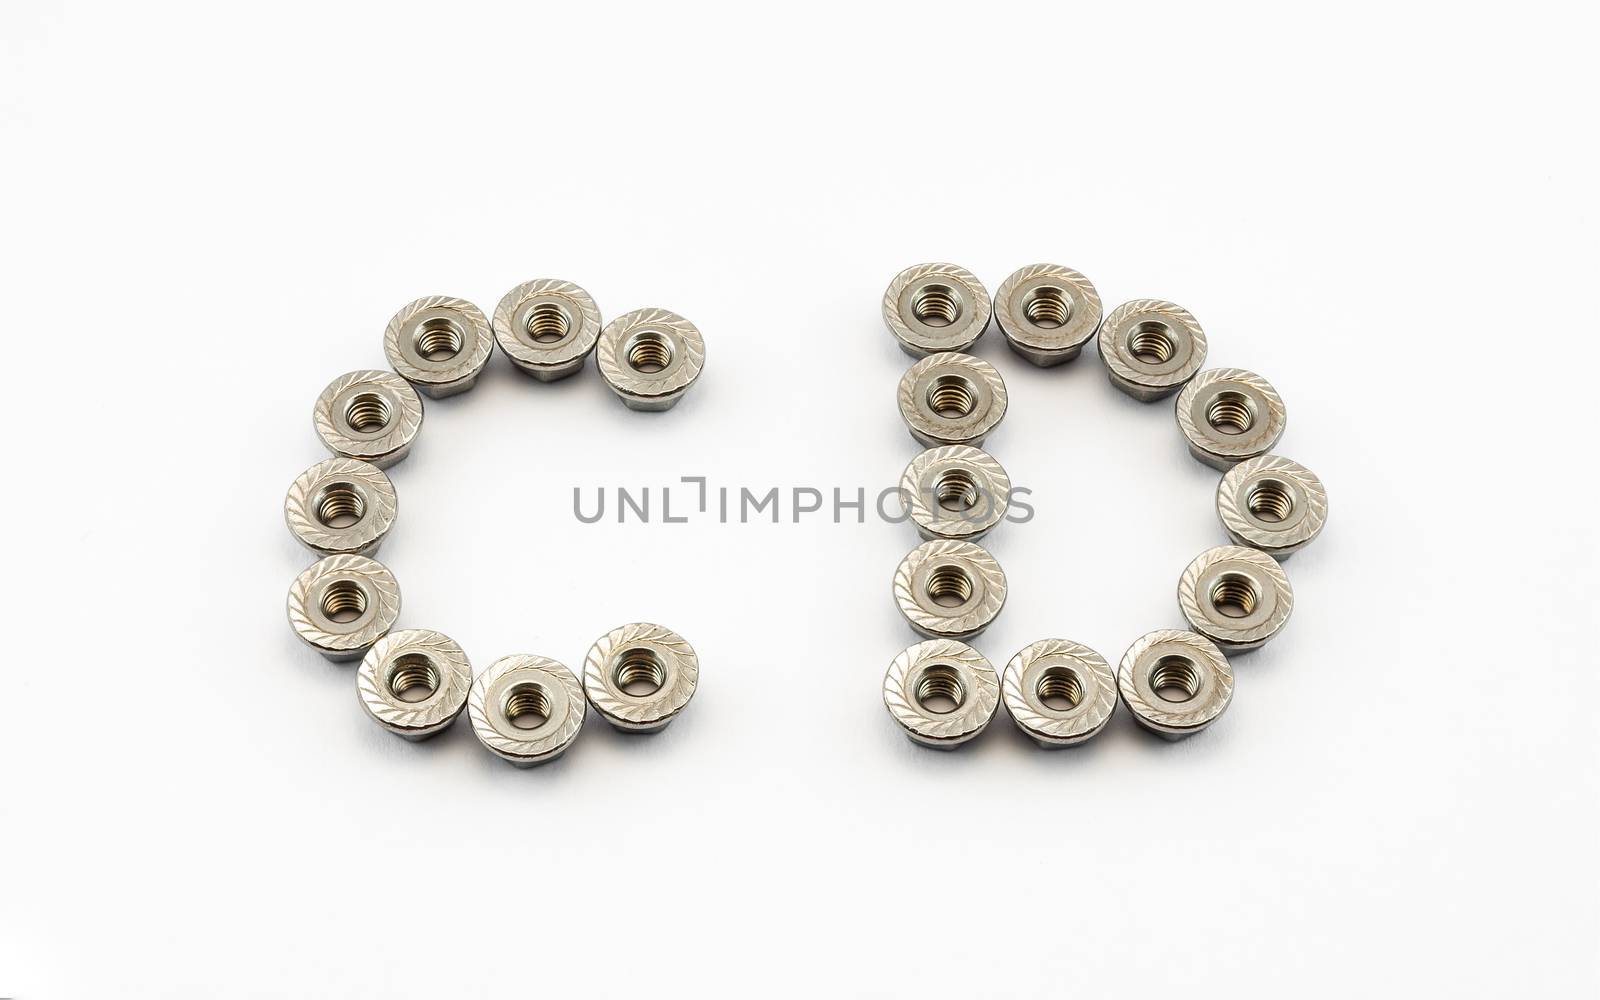 C and D Alphabet, Created by Stainless Steel Hex Flange Nuts by noneam